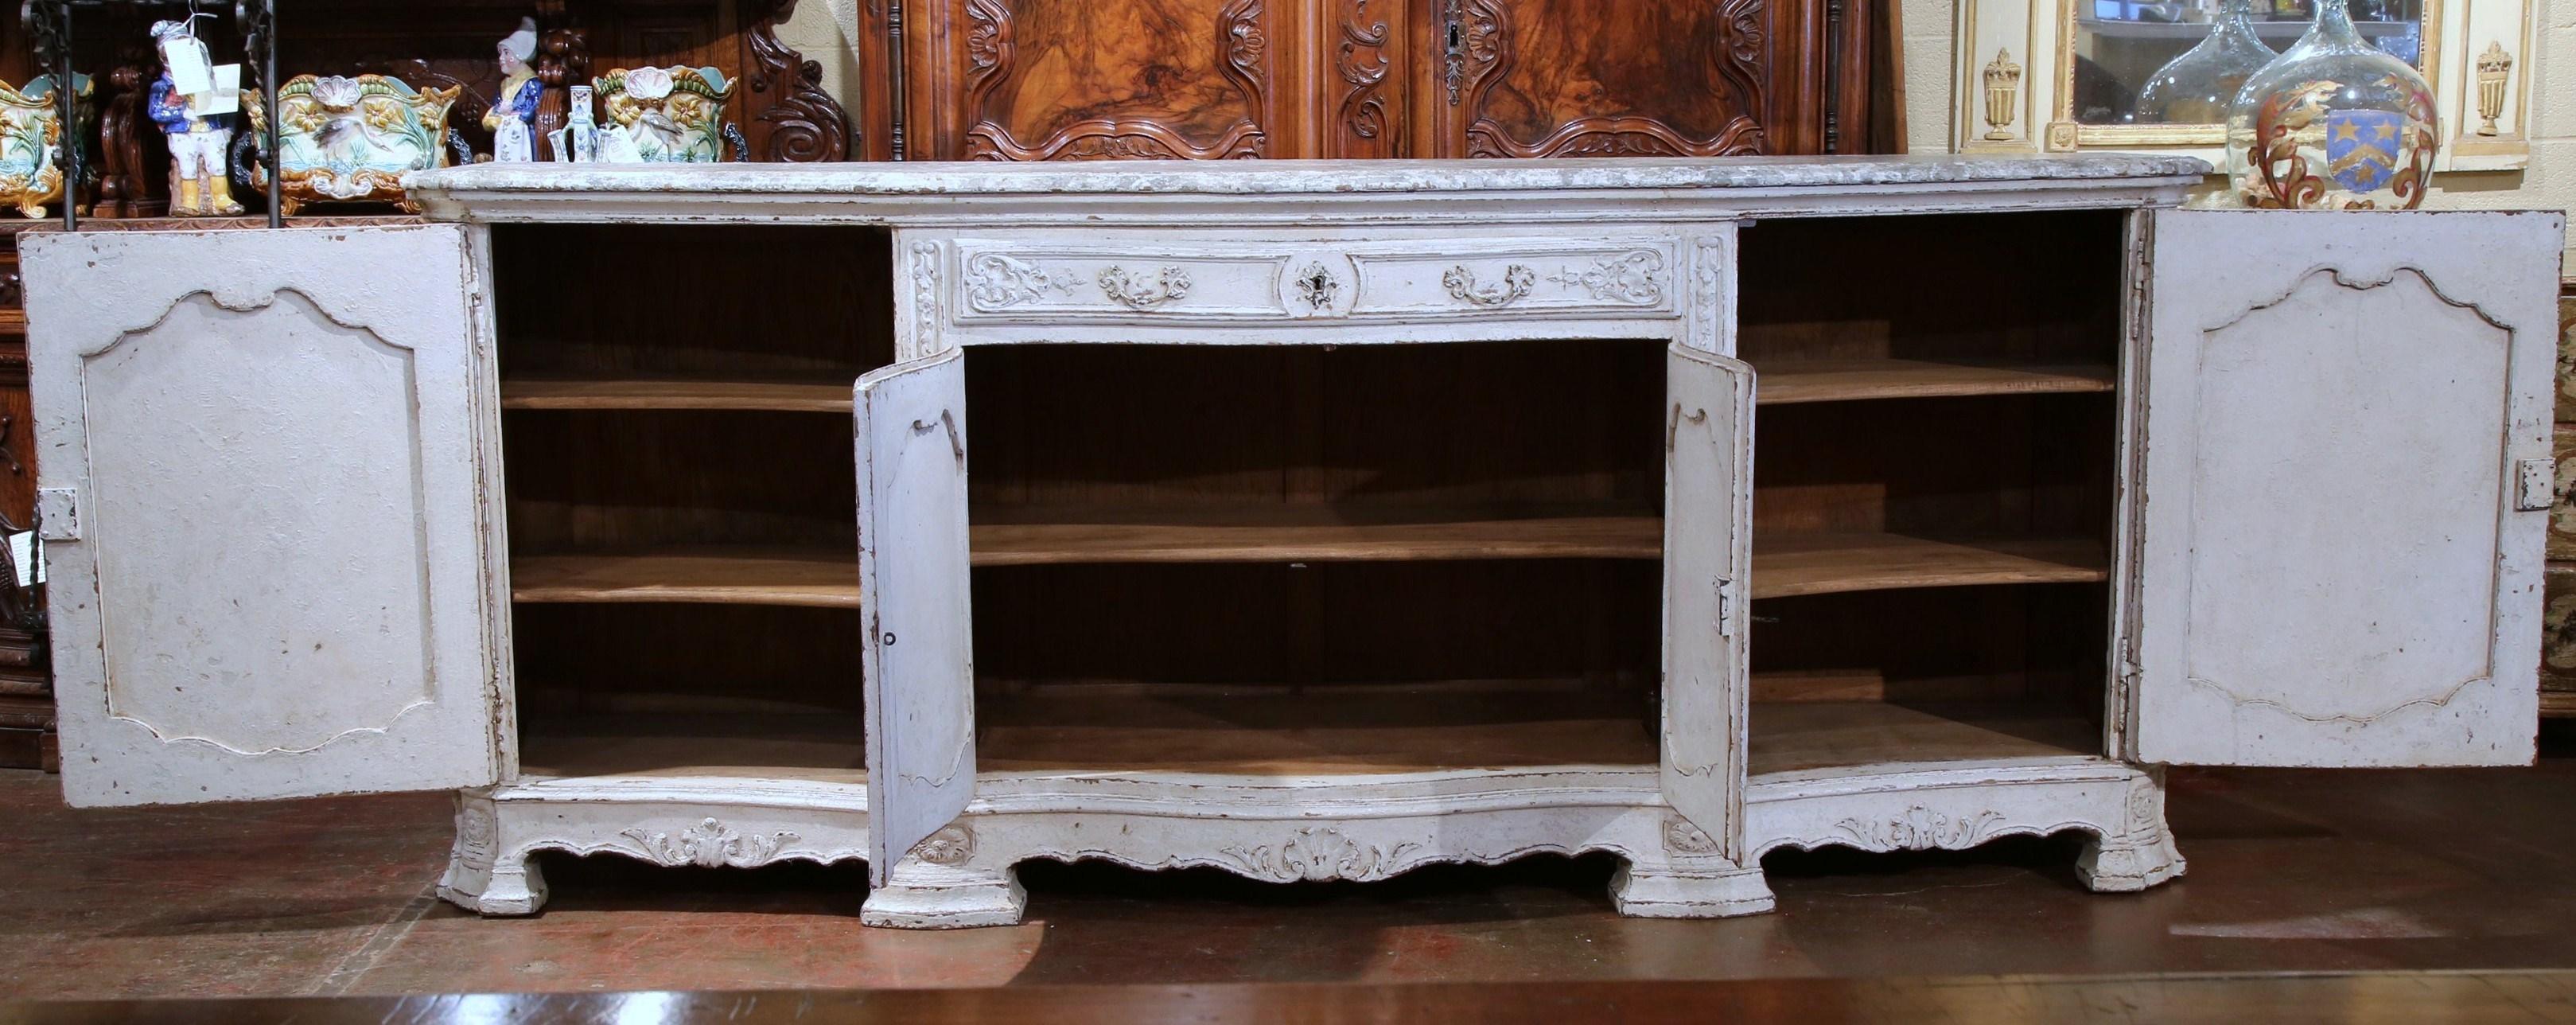 Regency 19th Century French Regence Carved Painted Four-Door Buffet with Faux Marble Top